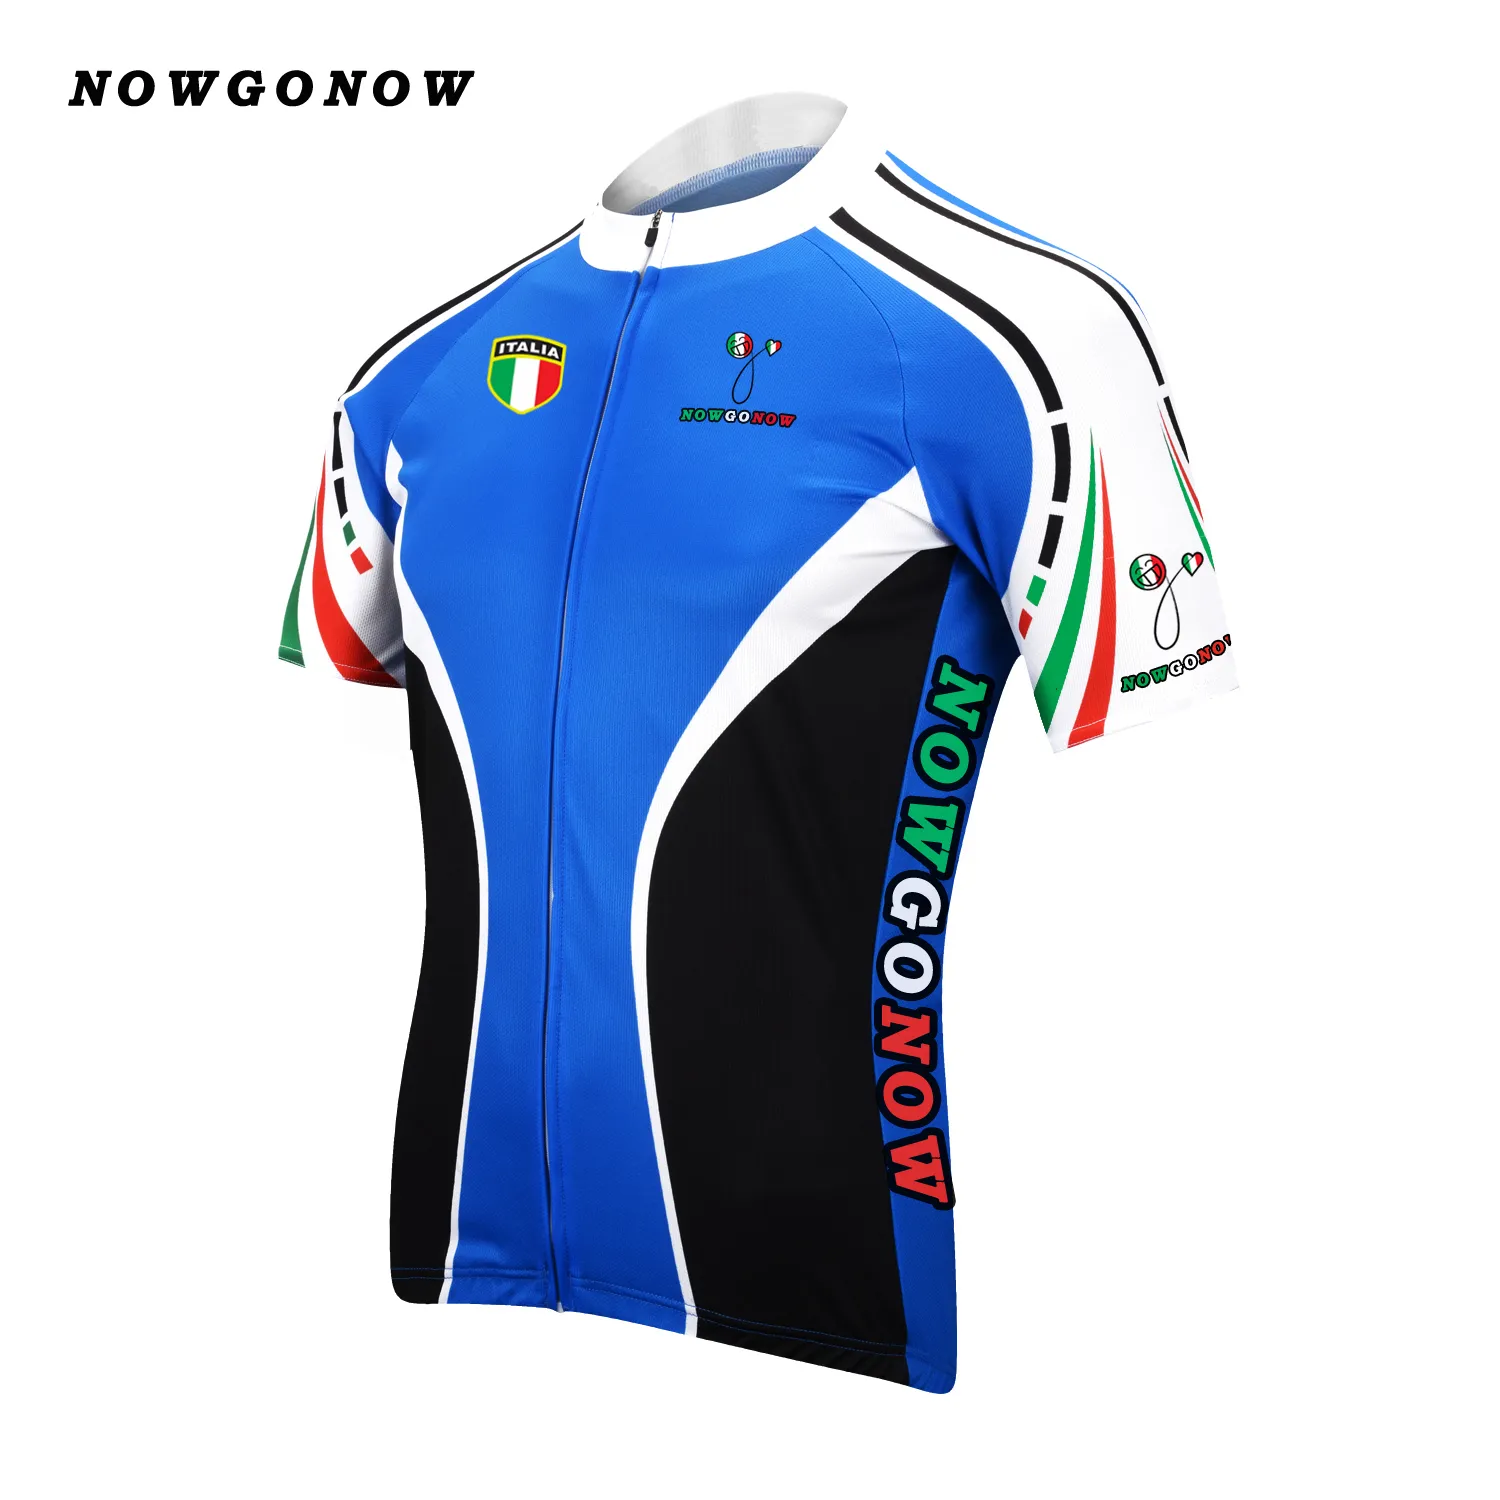 Tour 2017 Radsport Jersey Männer Blue Italy Pro Team Kleidungsrad Kleidung Nowgonow Tops Road Racing Mountain Triathlon Sommer MAILLOT CI310E